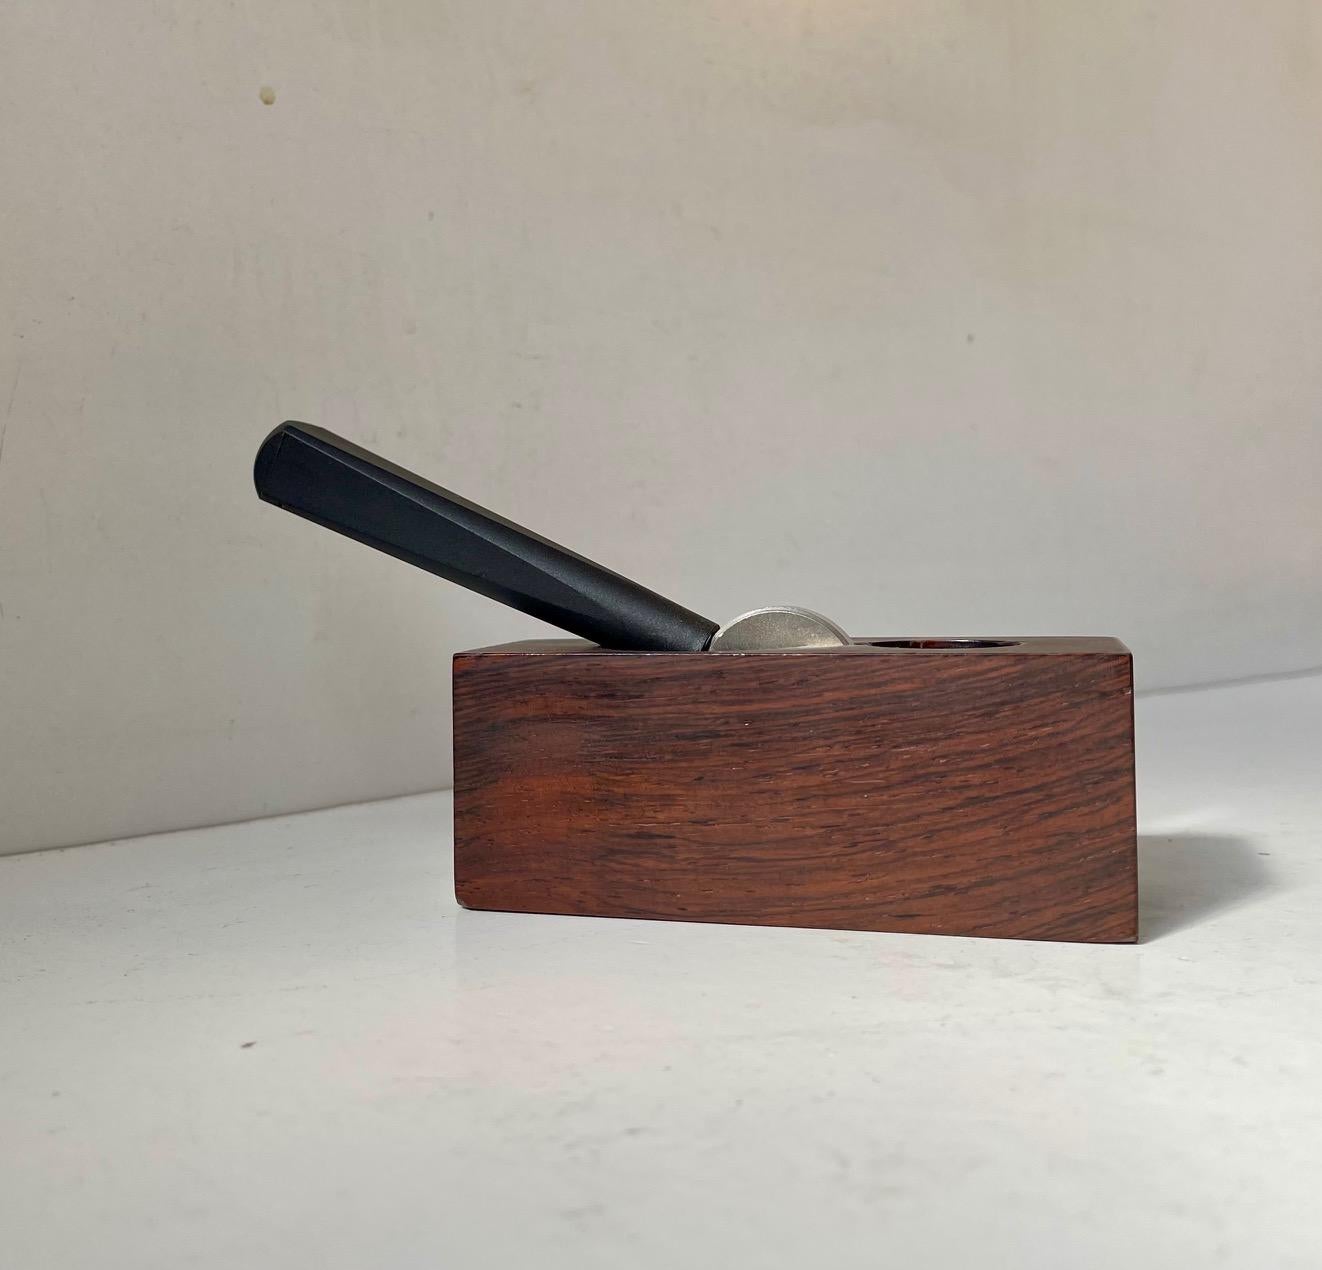 High quality, handmade and well-engineered nutcracker in rosewood, black resin and stainless steel. Designed and made by Yüksel Caglar in Denmark during the 1970s. It features two compartments. One for hazelnuts and one for walnuts. Please notice